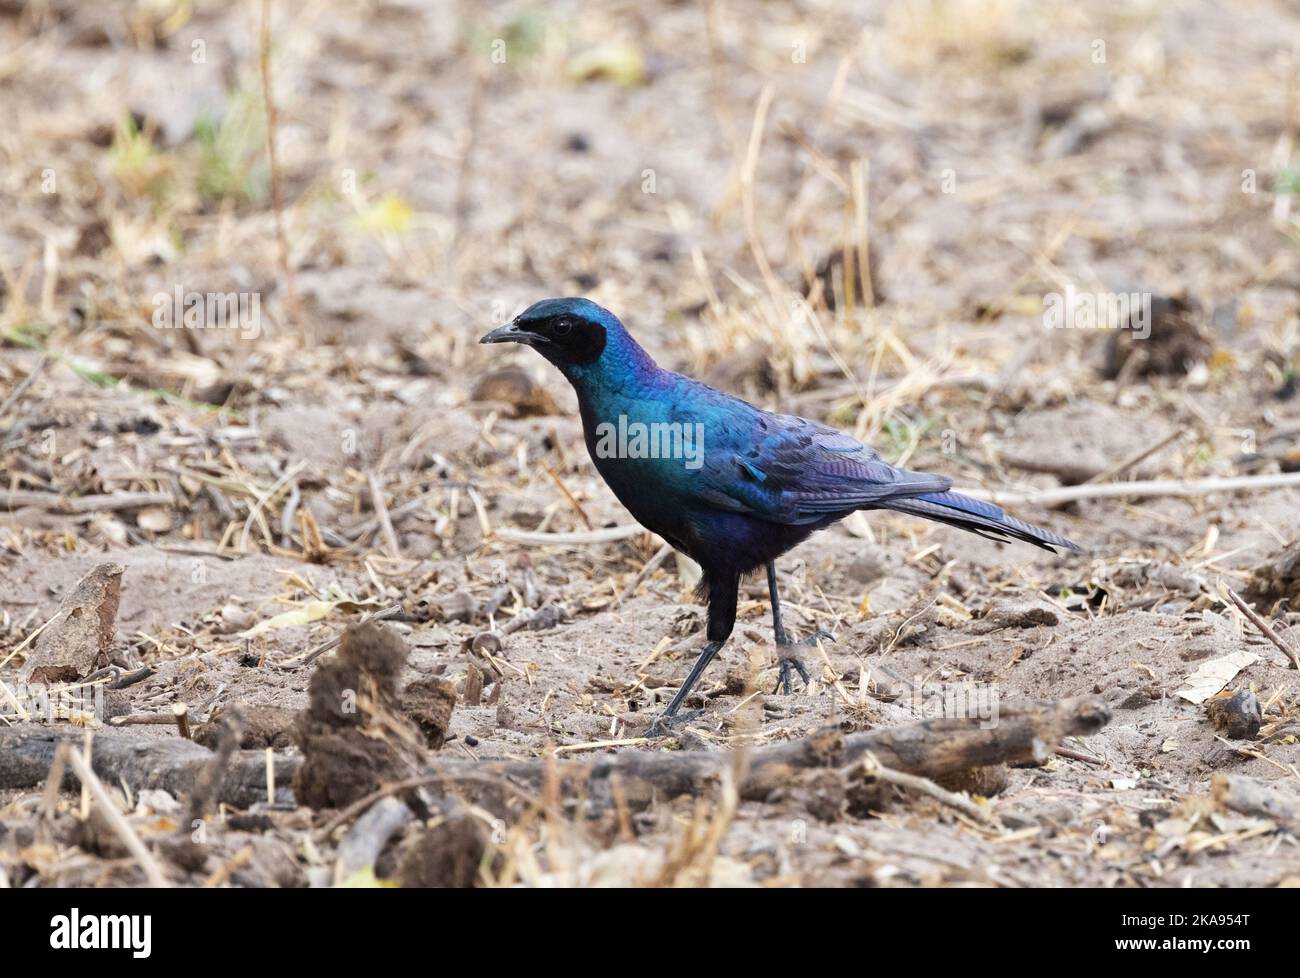 Burchells Starling, Lamprotornis australis, or Burchells Glossy Starling; on the ground, Moremi Game reserve Botswana Africa. - African birds Stock Photo